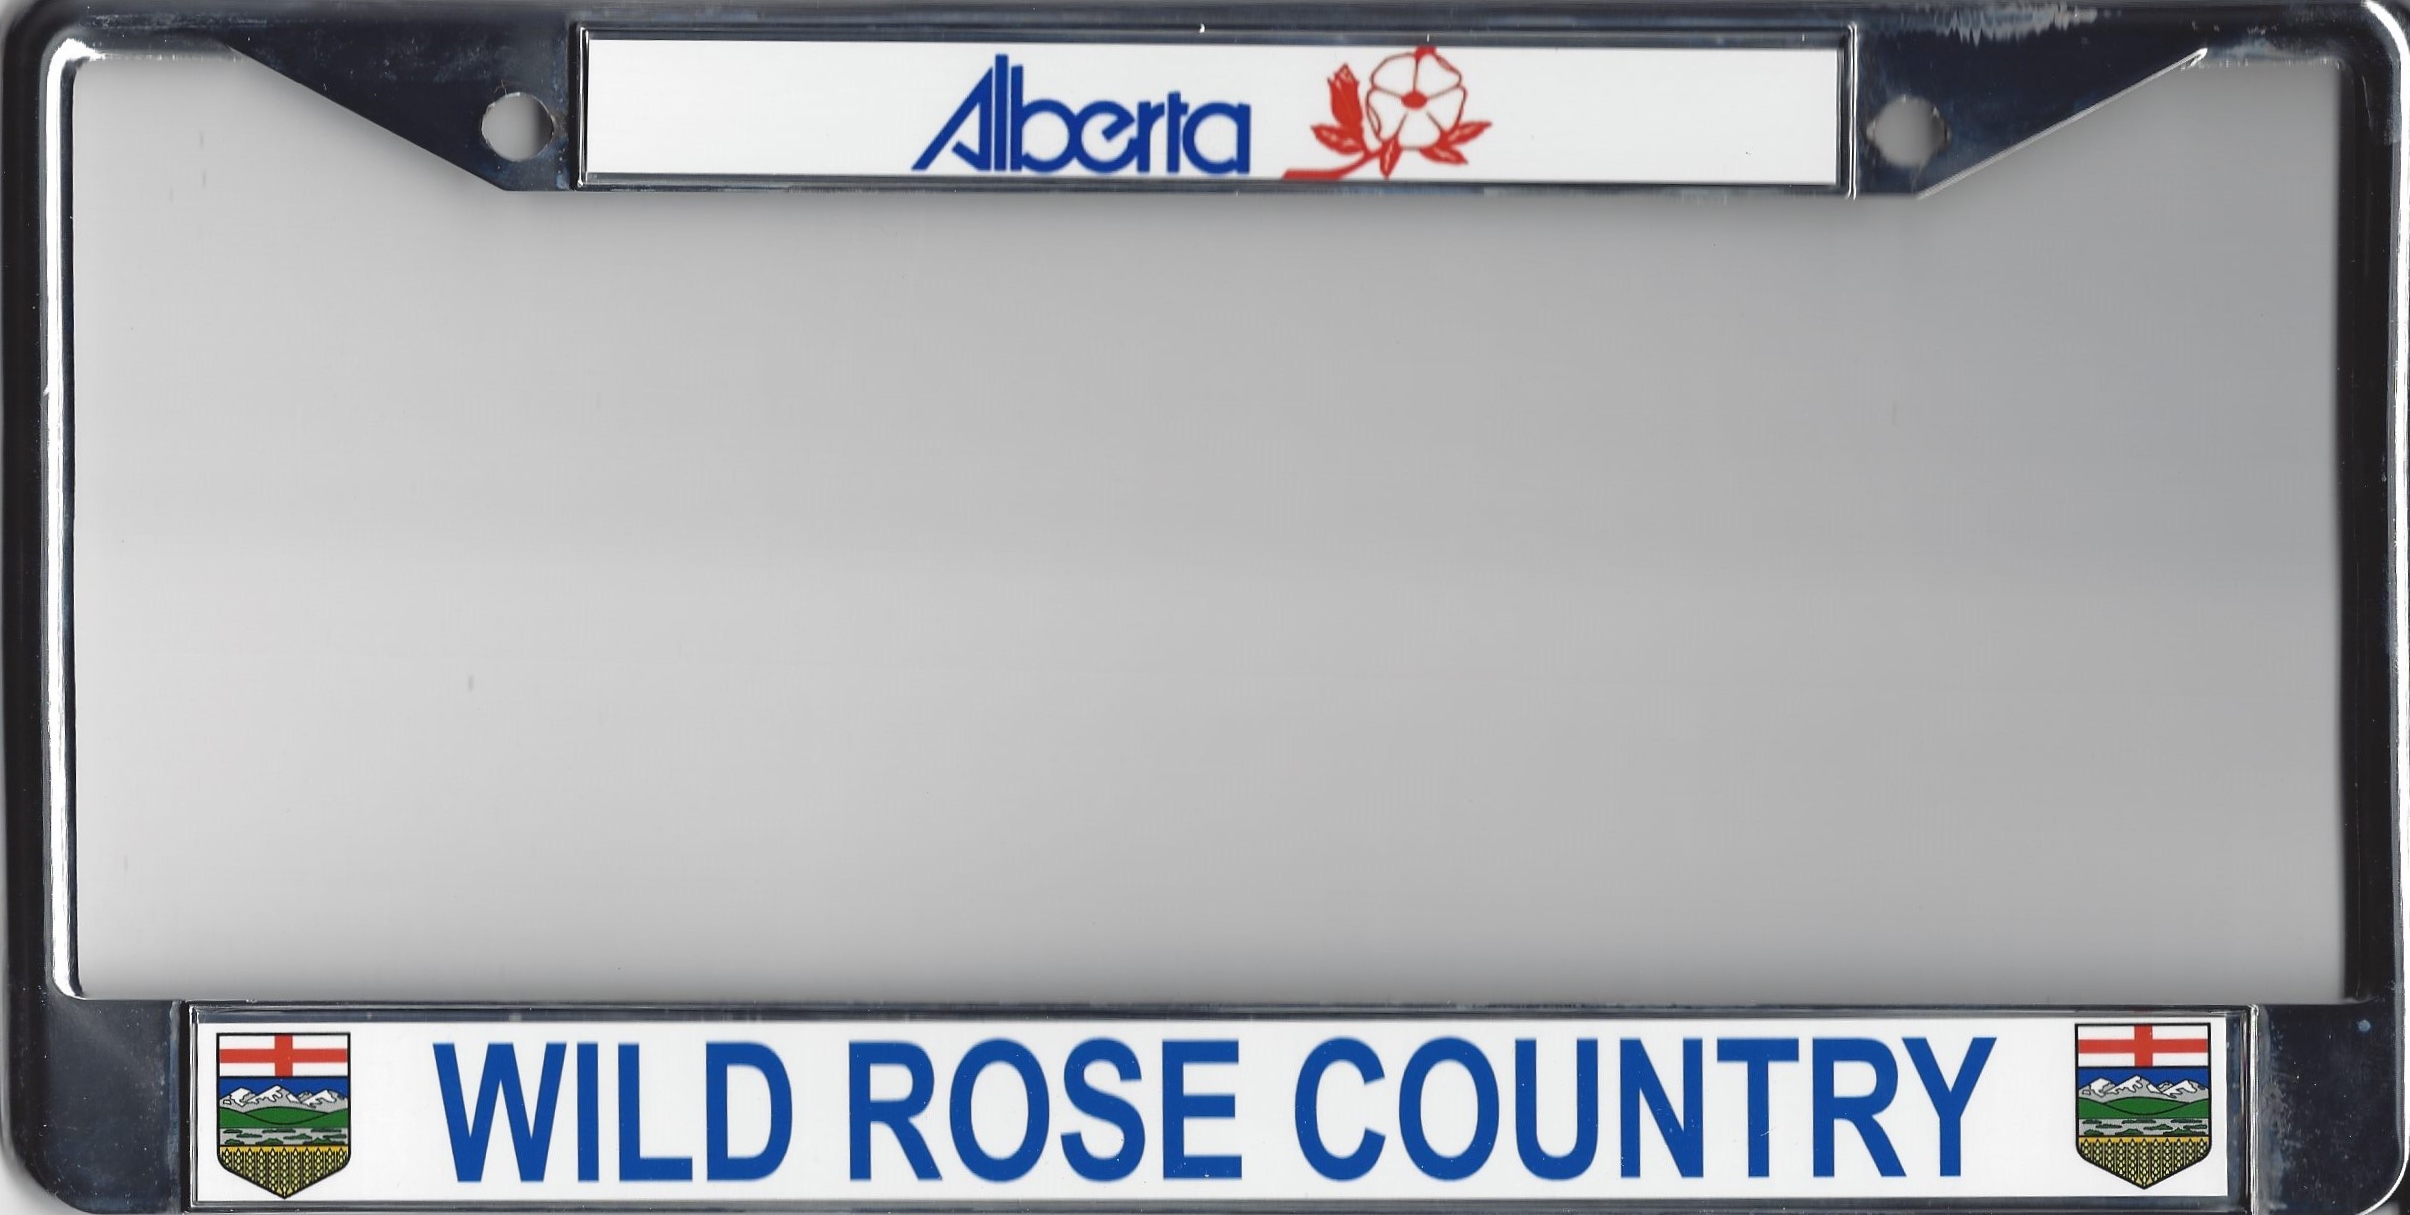 Alberta Wild Rose Country License Plate Frame  Free SCREW Caps with this Frame